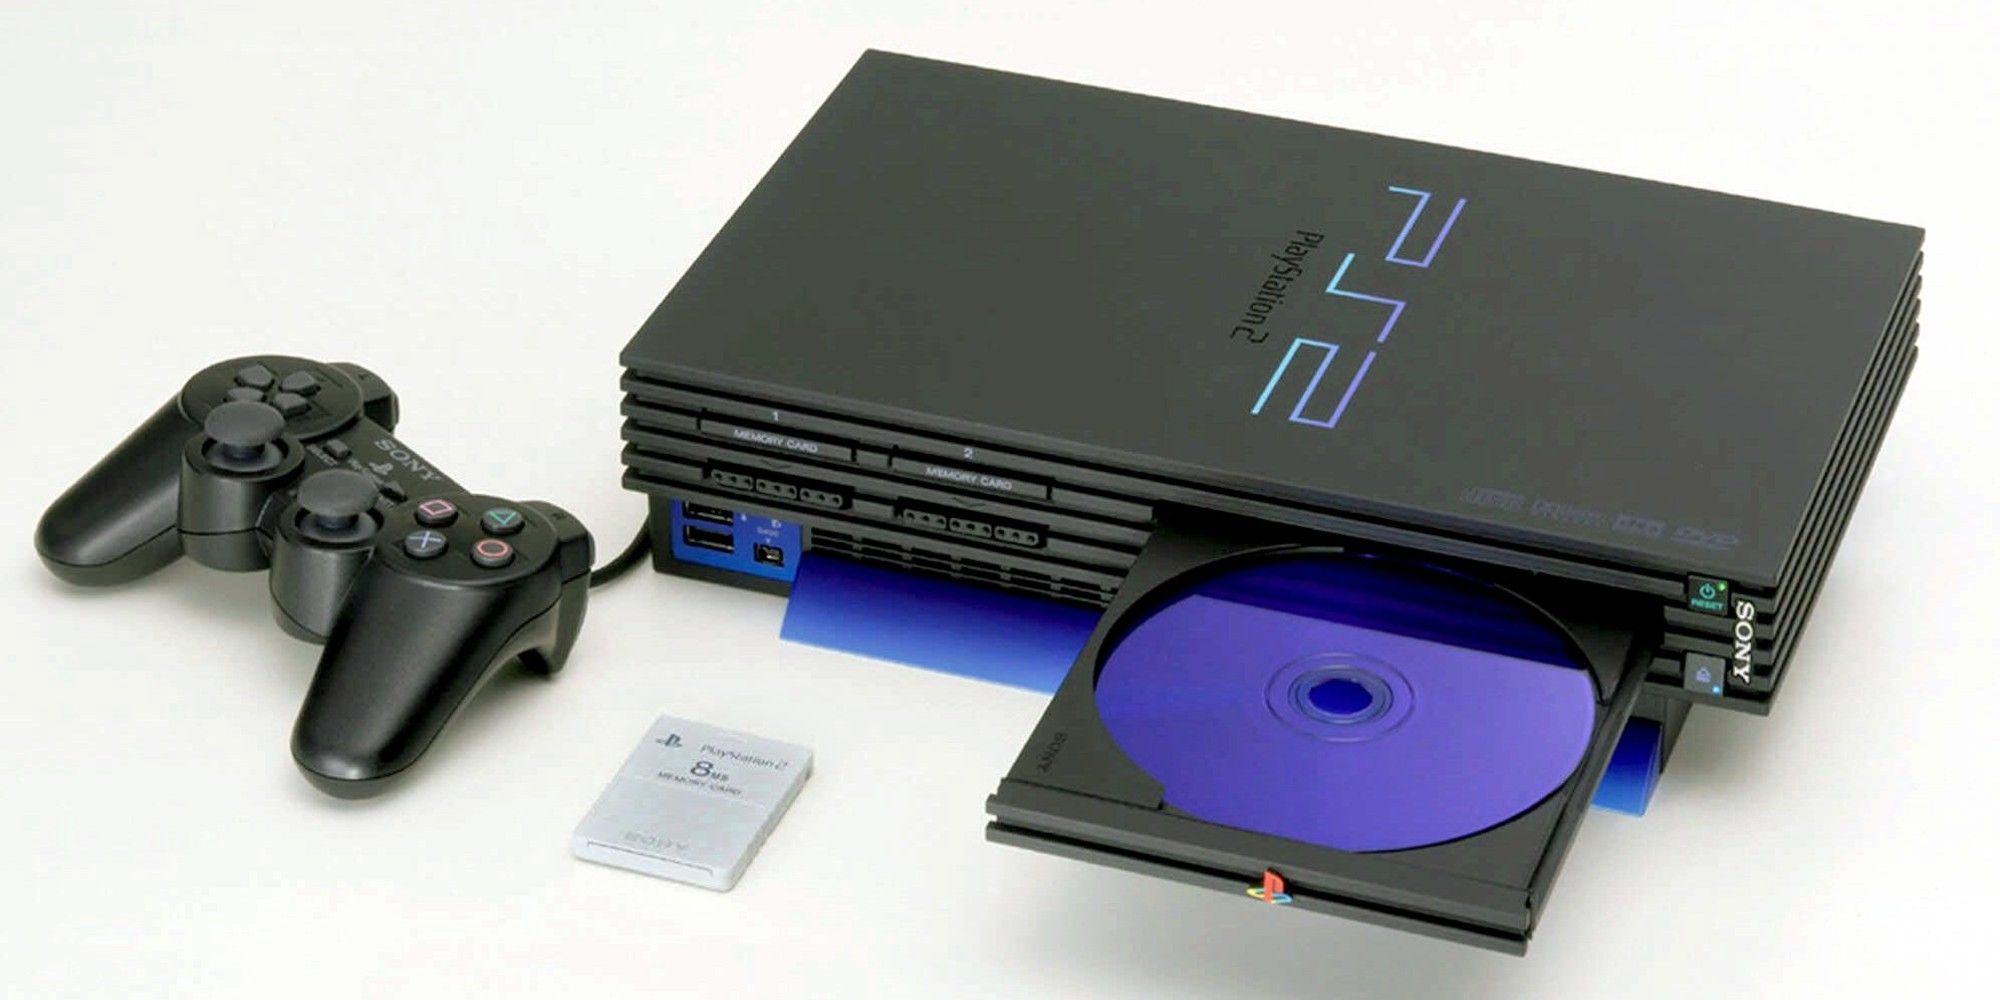 What Made the PlayStation 2 the Bestselling Console of All Time?